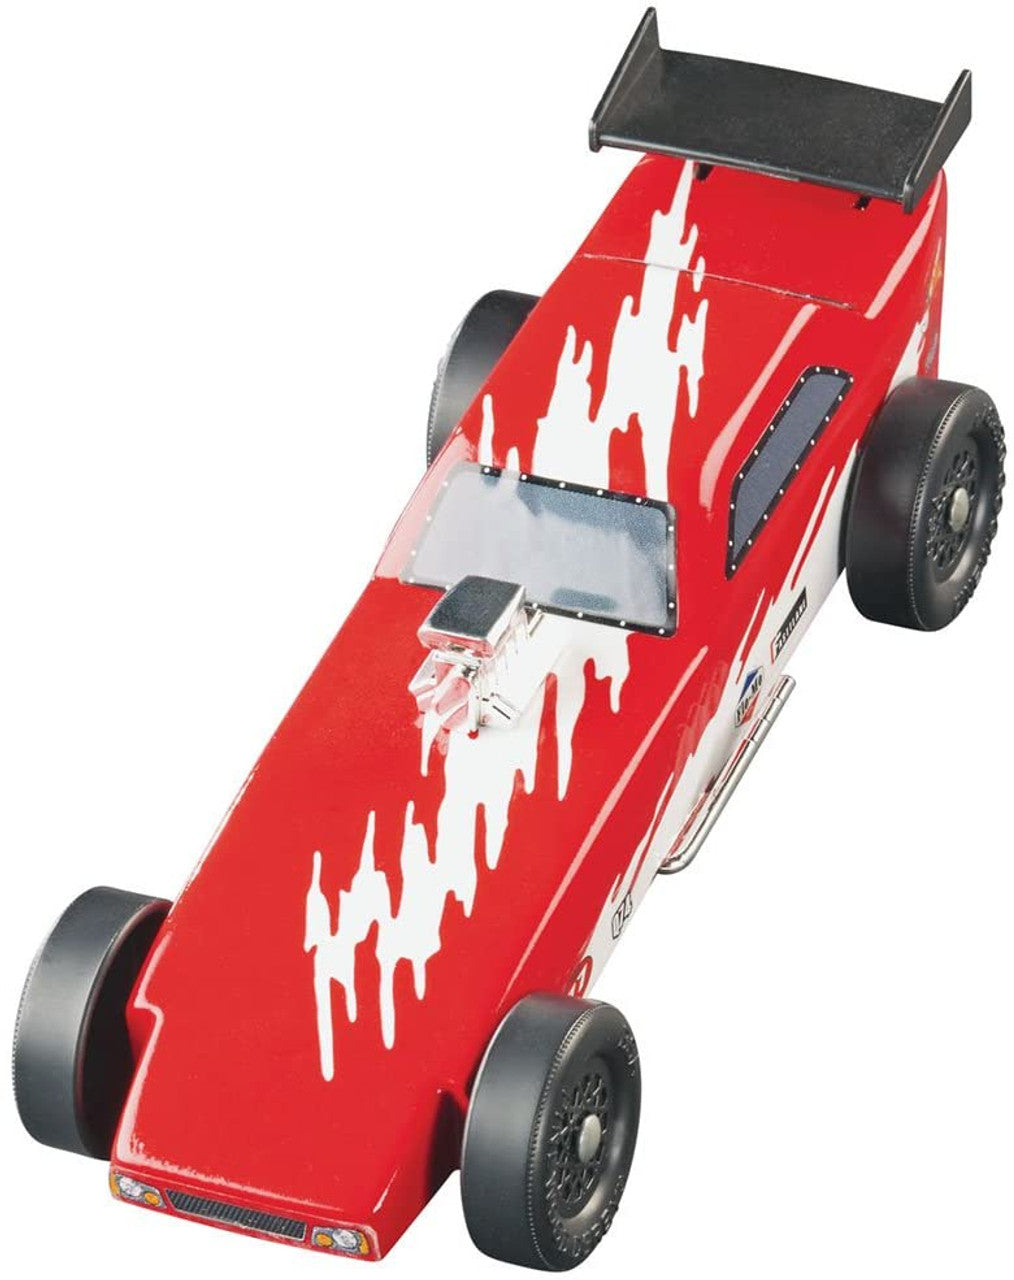 Revell Pinewood Derby Carving Set